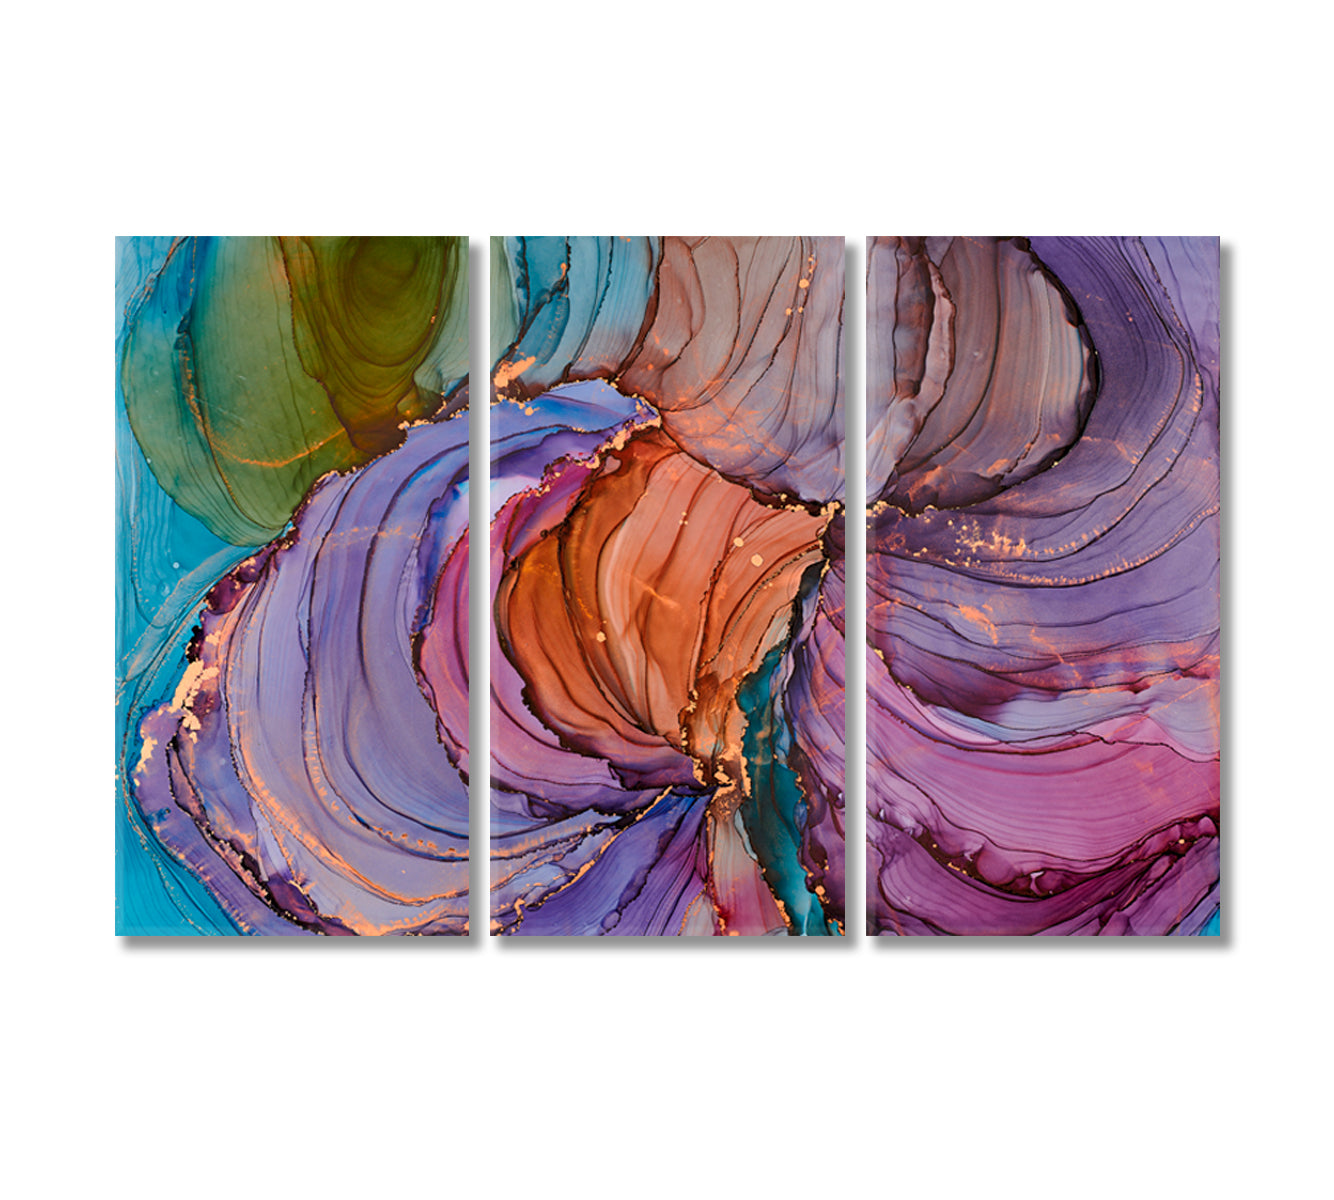 Natural Luxury Abstract Fluid Art Waves and Swirls Canvas Print-Canvas Print-CetArt-3 Panels-36x24 inches-CetArt